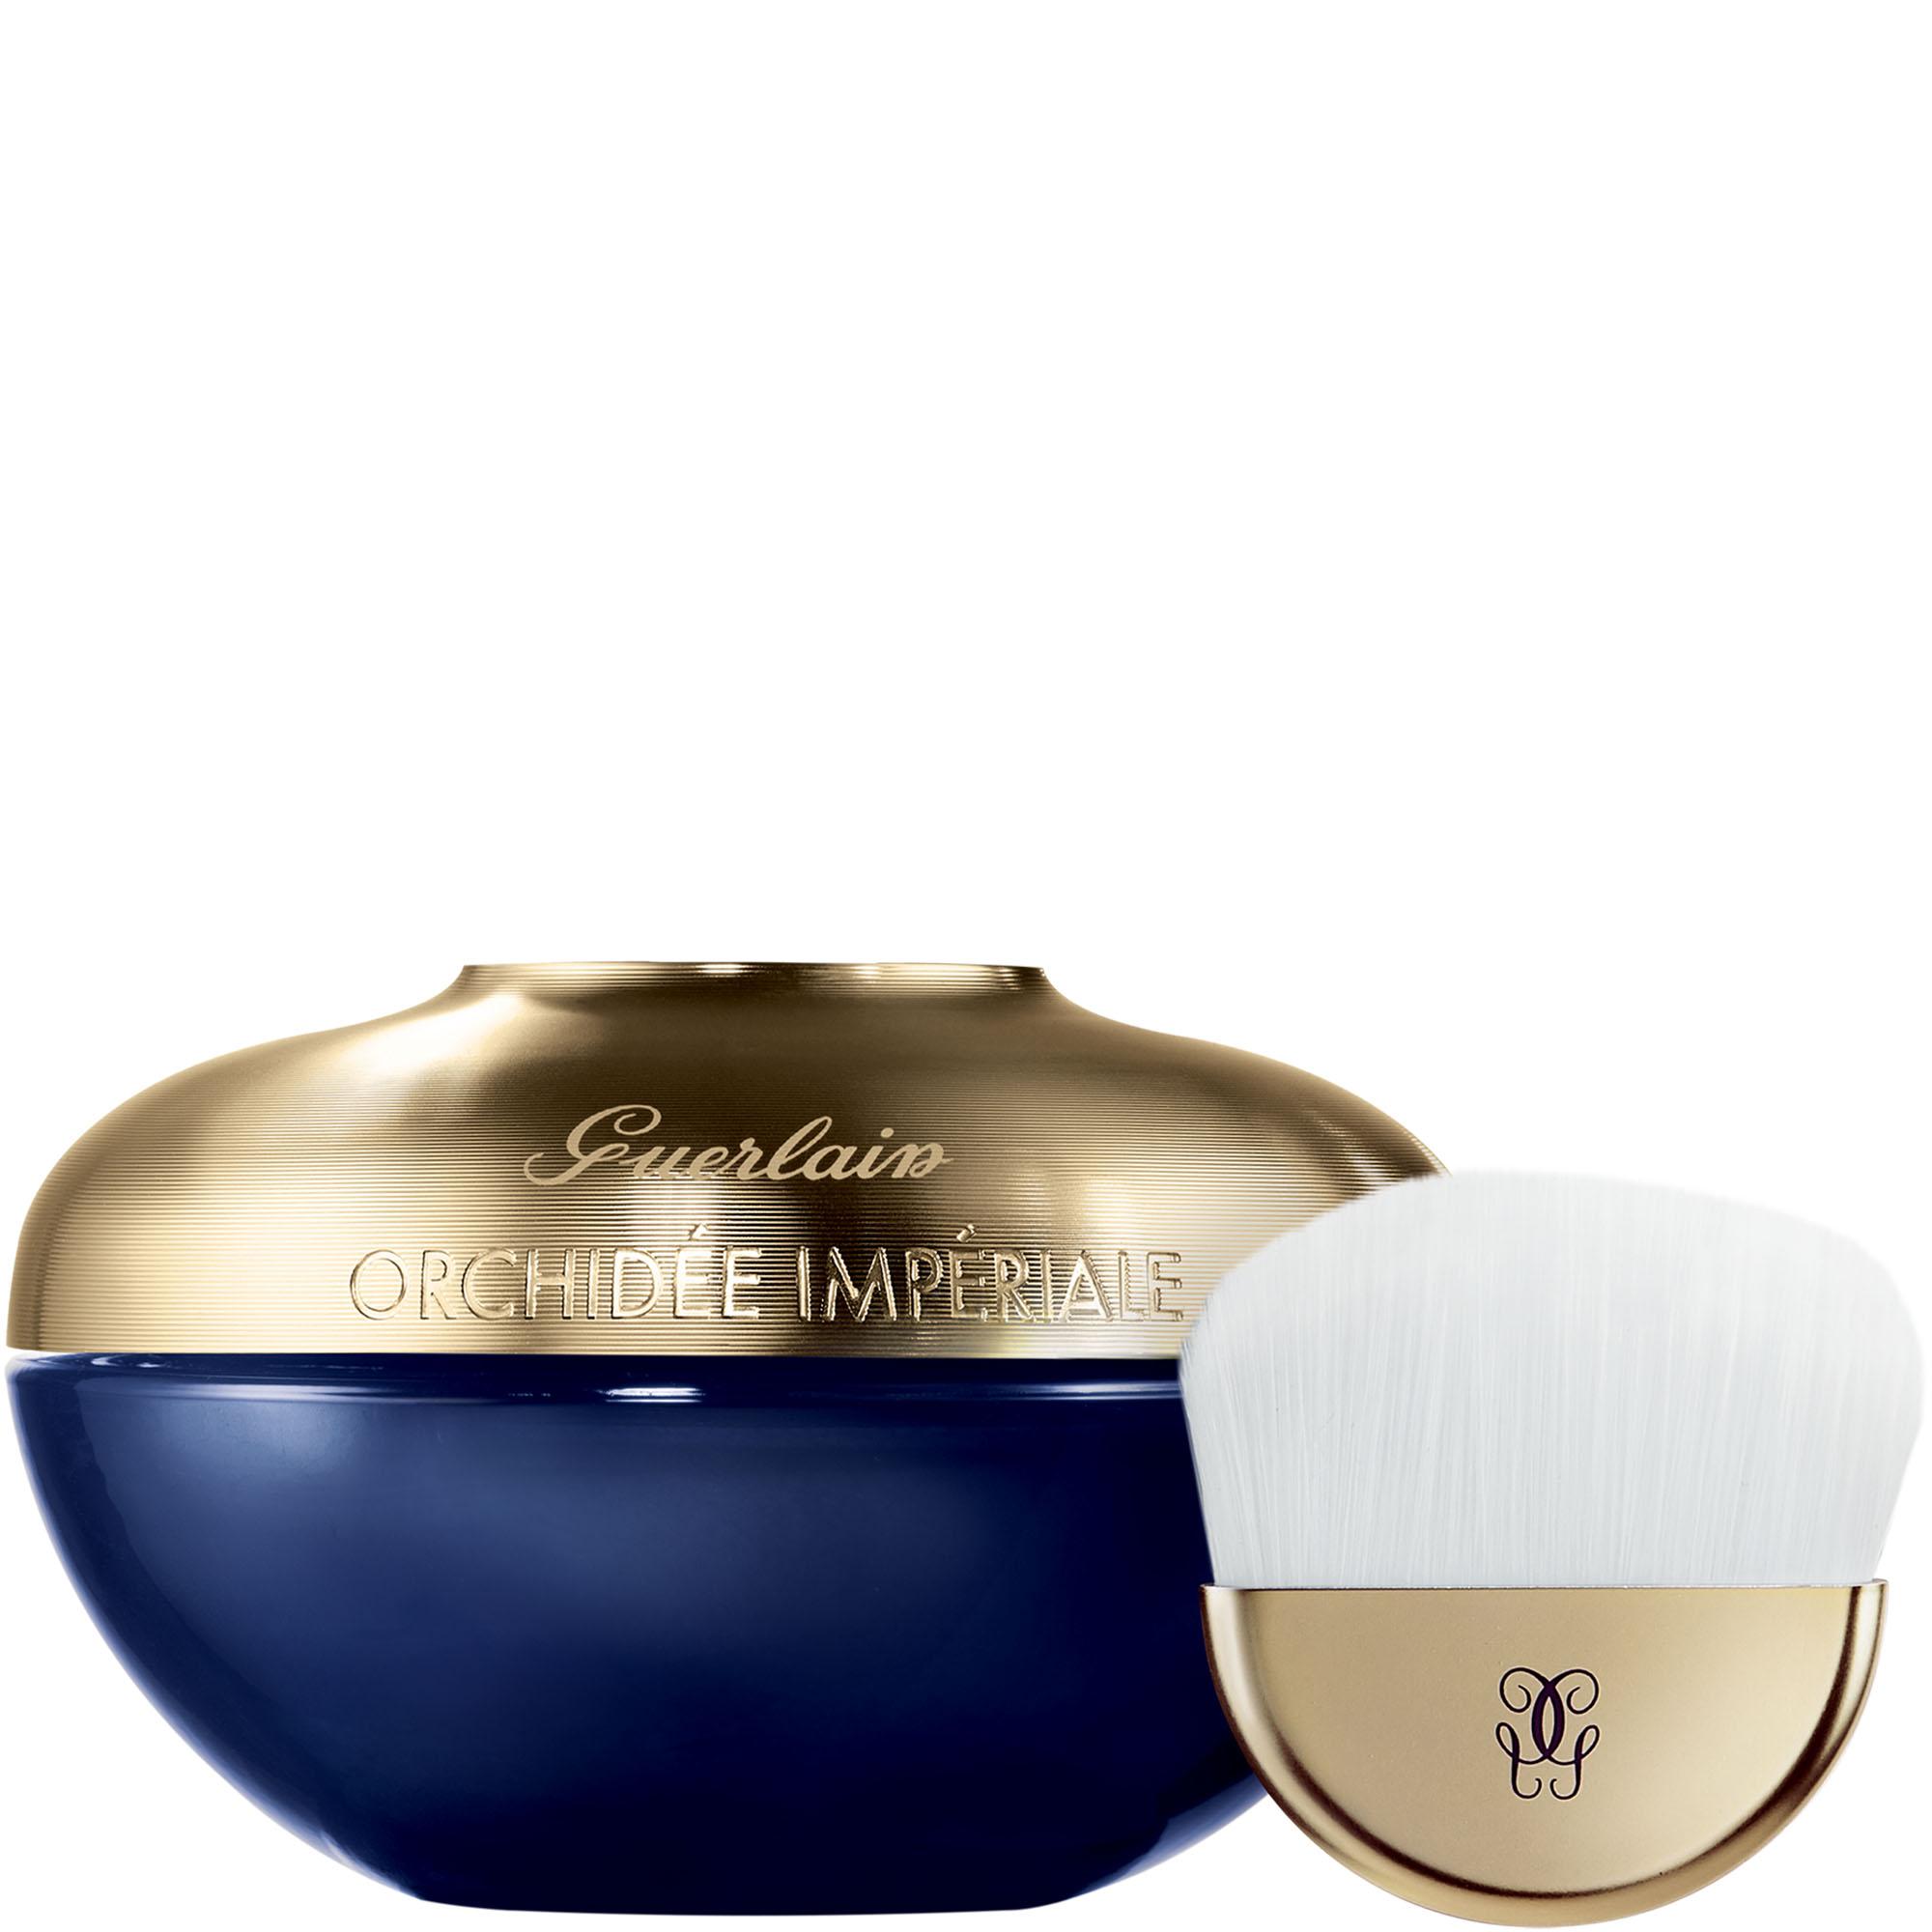 Orchidee Imperiale Mask